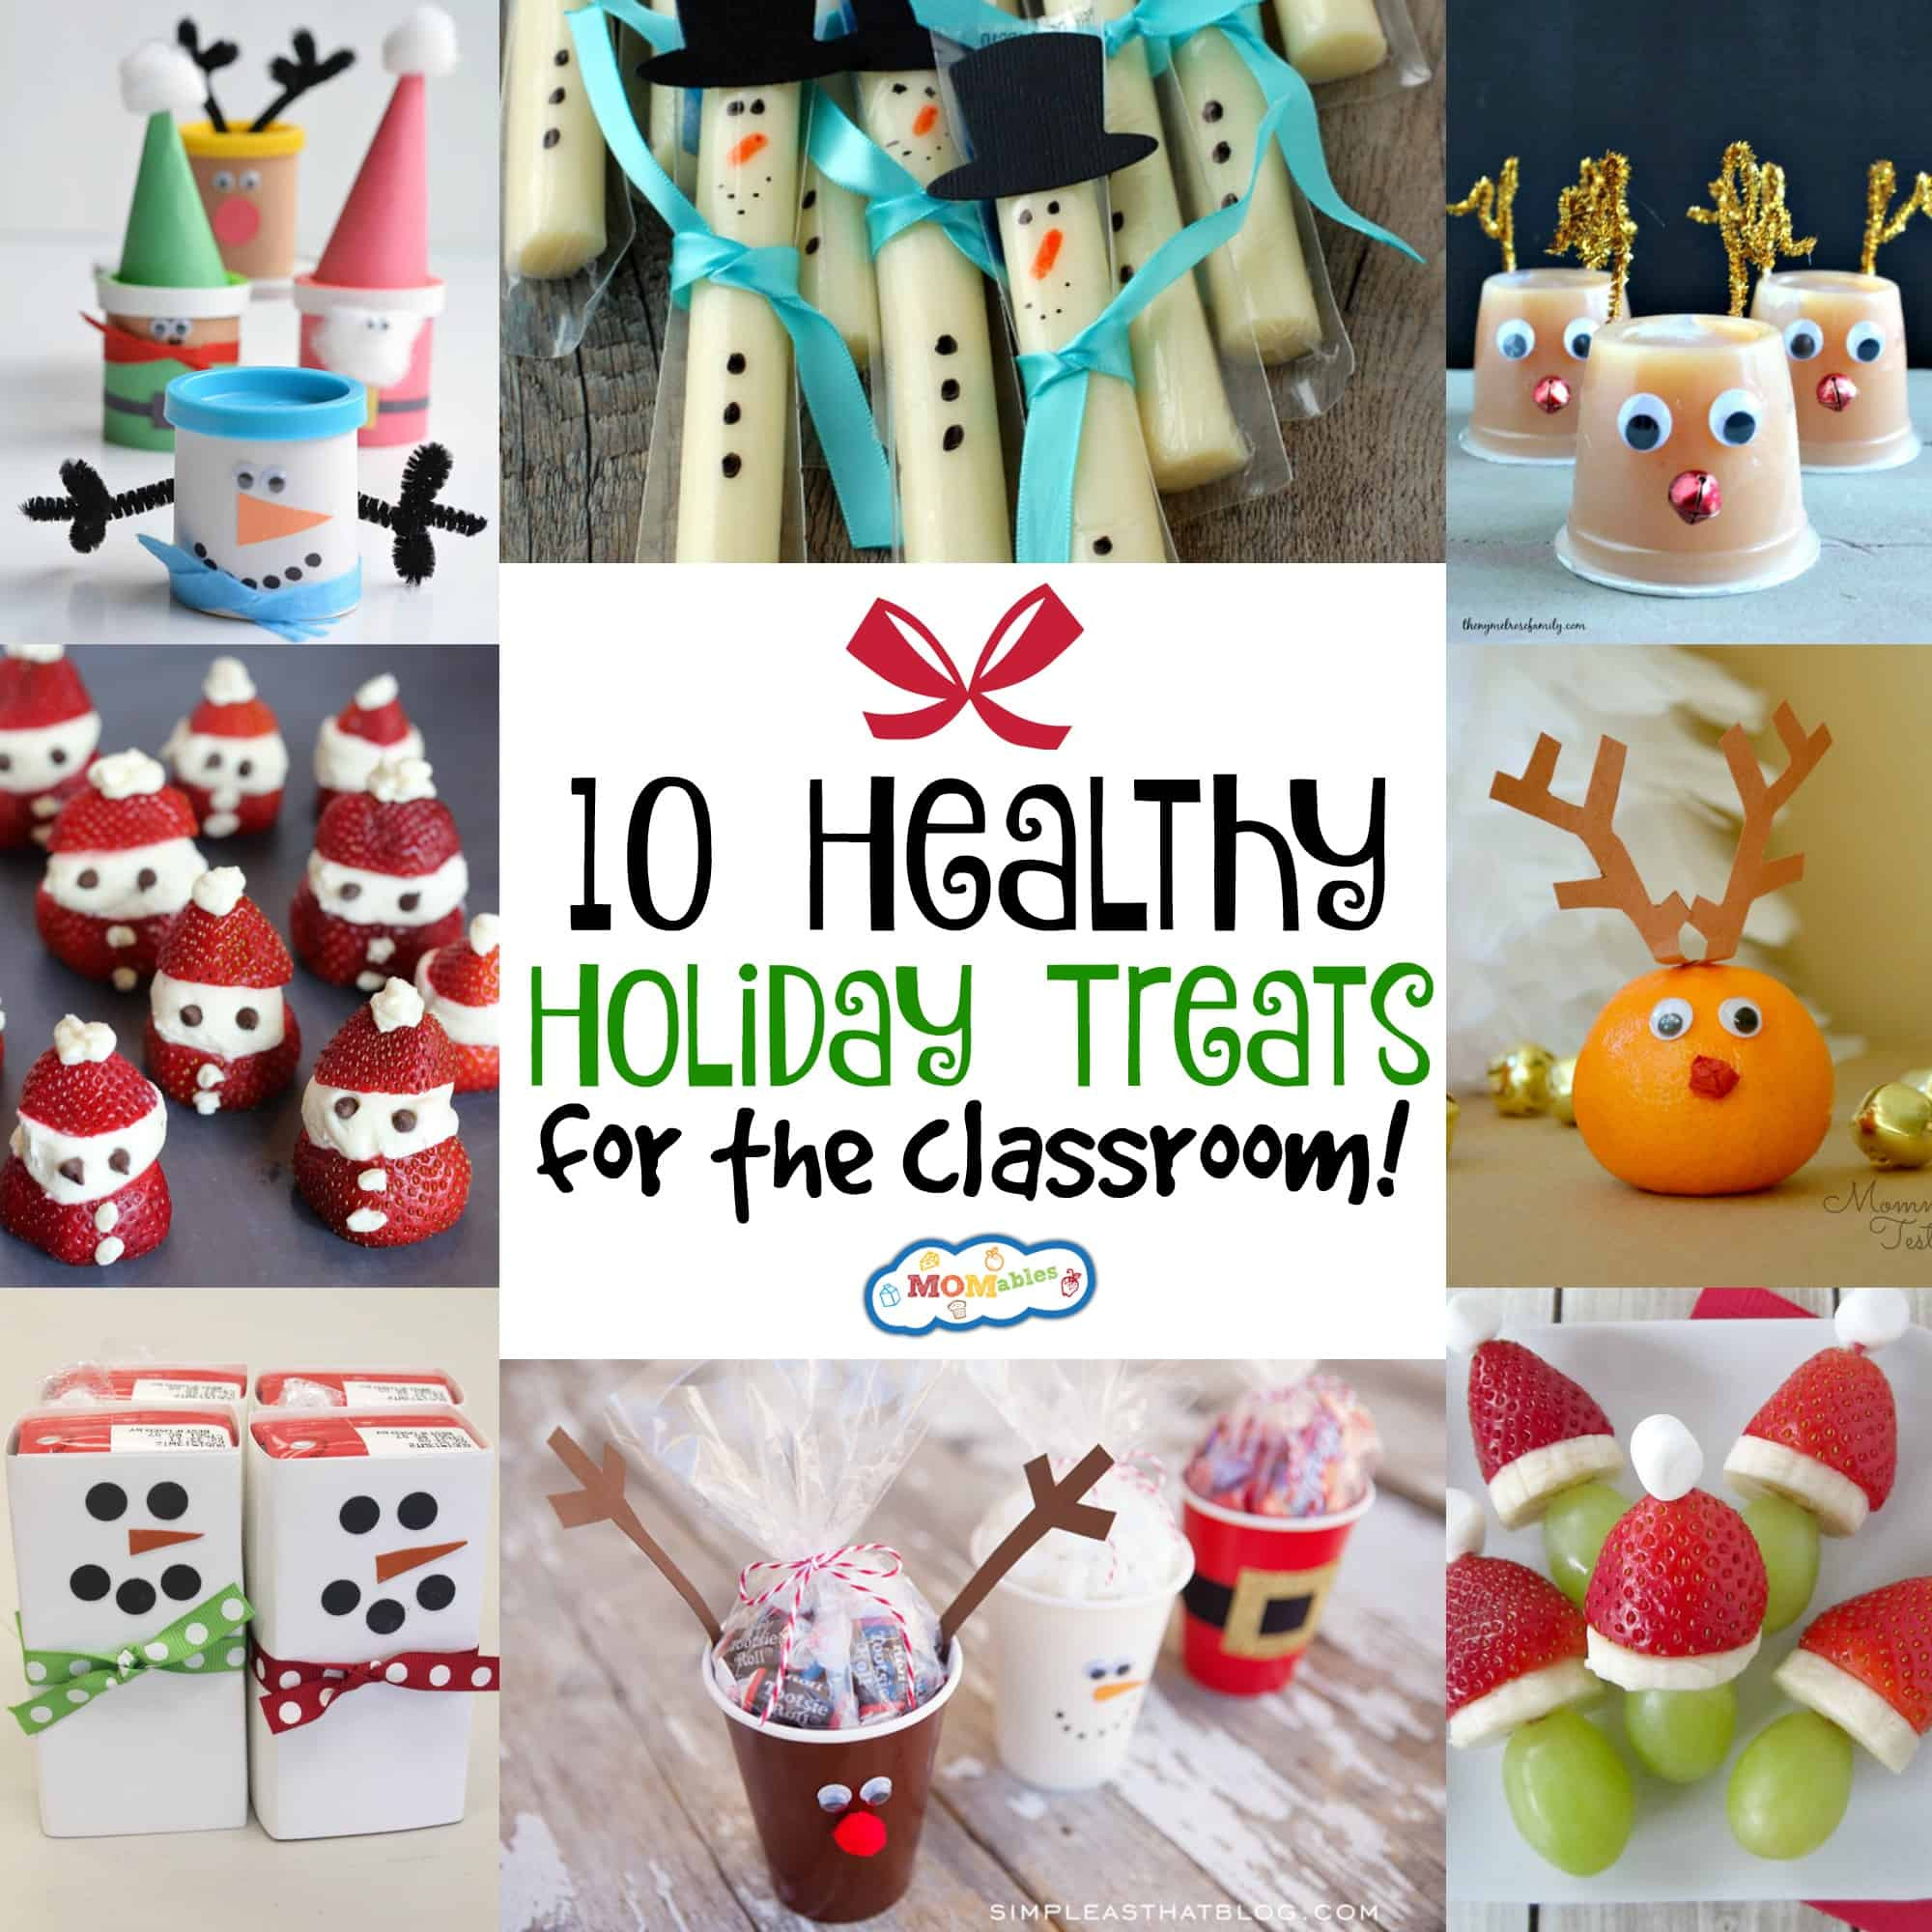 Class Holiday Party Ideas
 10 Healthy Holiday Treats for the Classroom MOMables